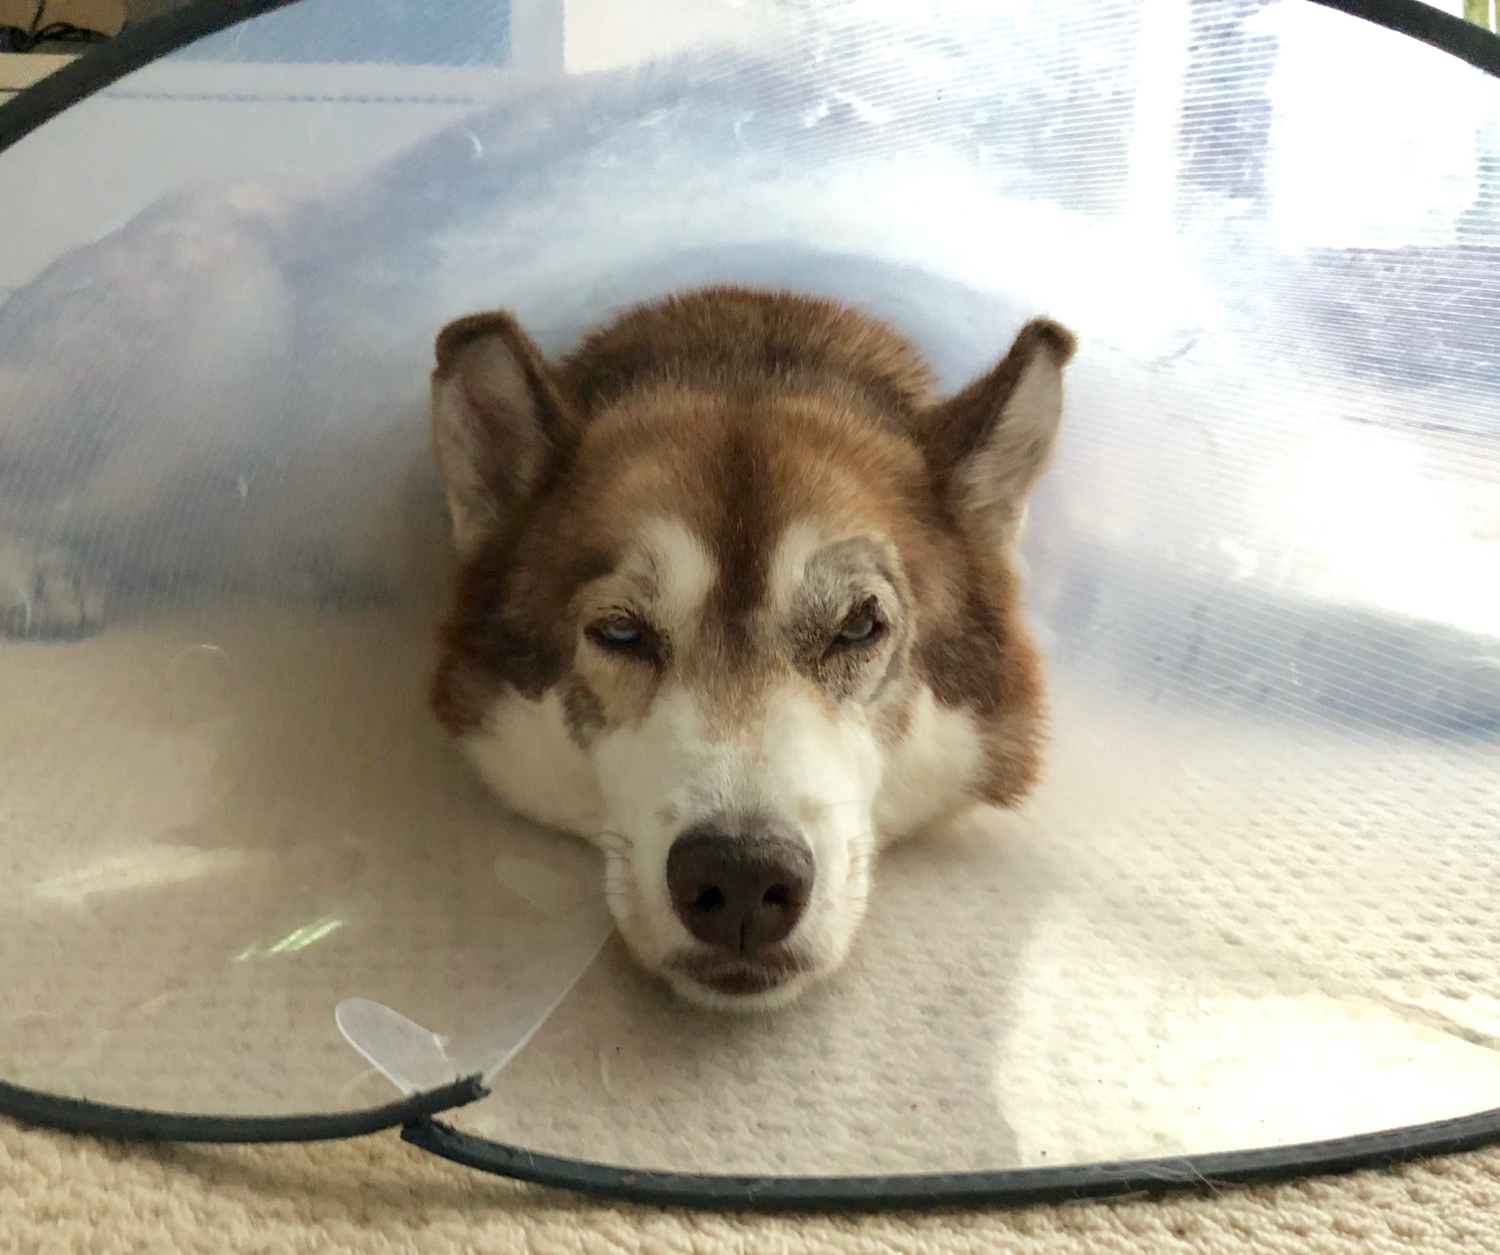 Osky looking fed up with a vet’s cone around his neck. The area around his right eye is shaved with a large stitch on his right eyelid.